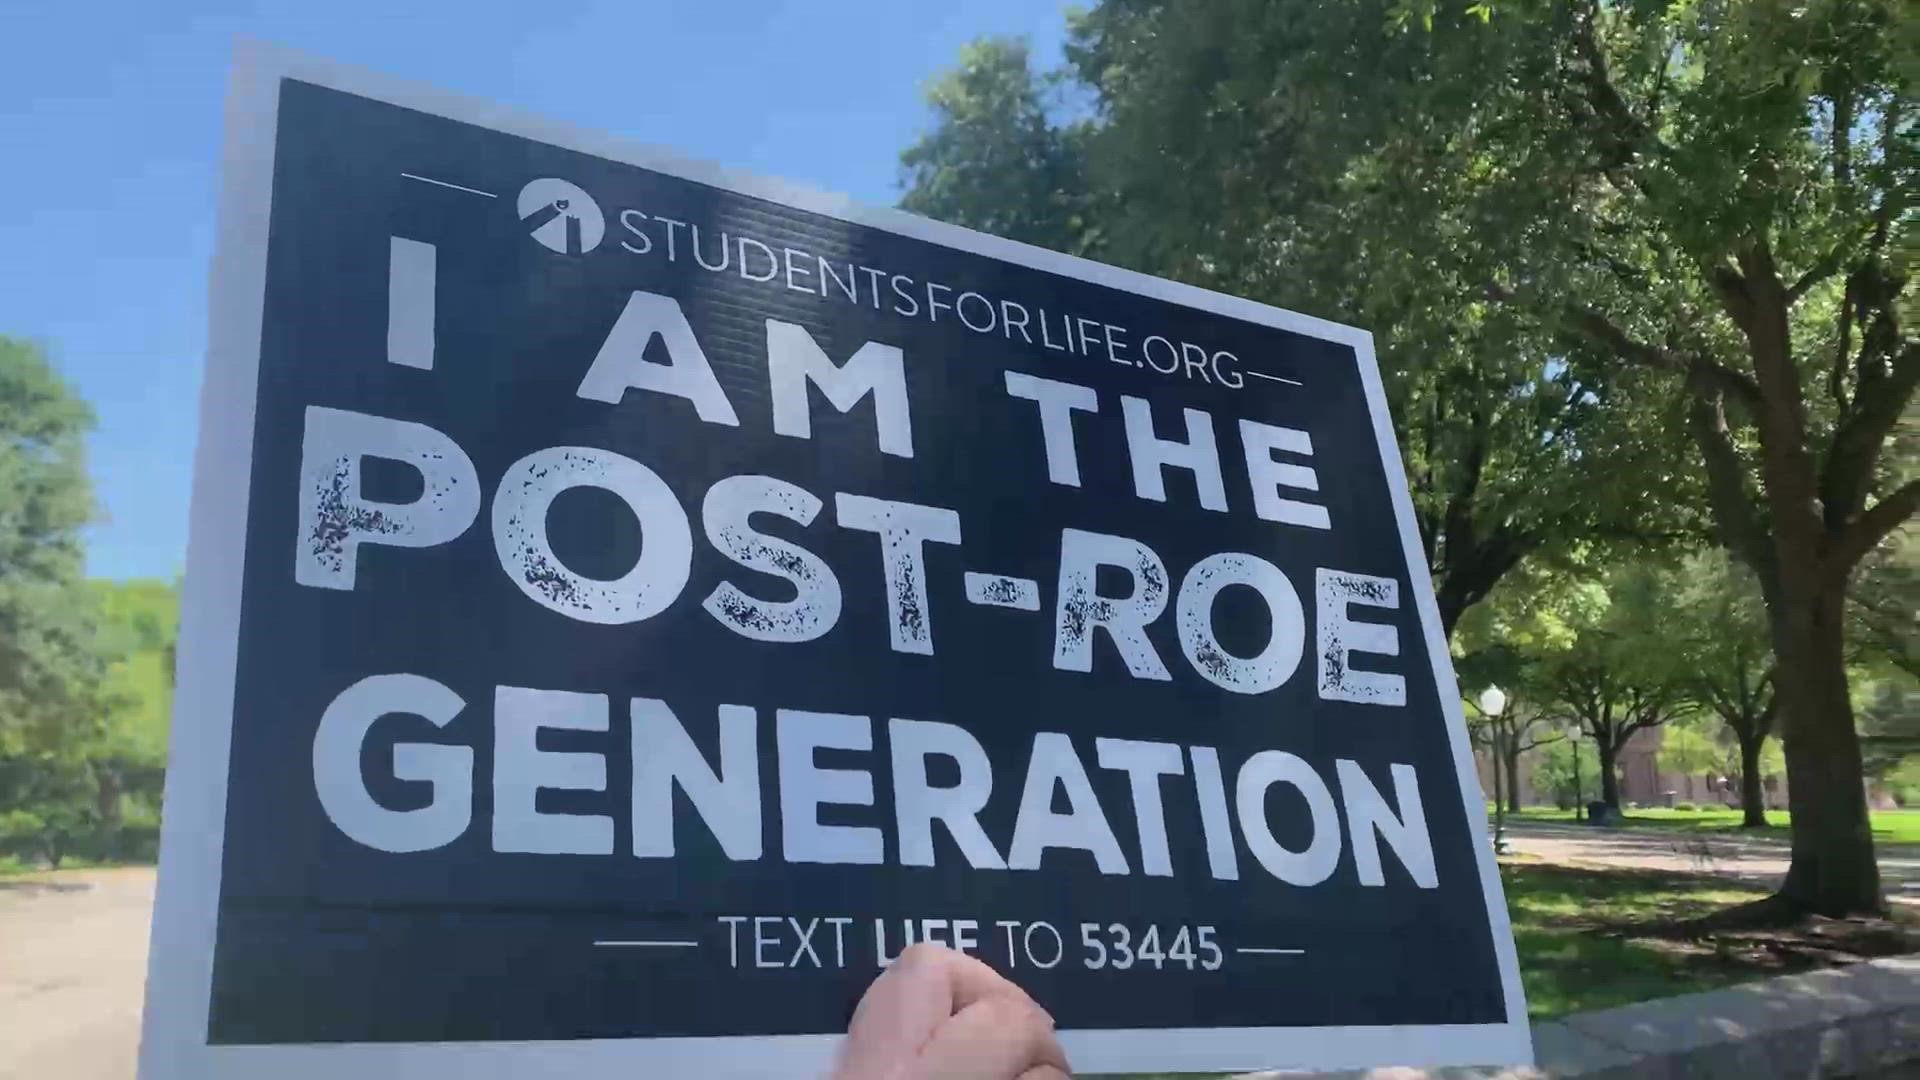 On Saturday morning, Texas Right to Life organized a rally to celebrate the Supreme Court decision to overturn Roe v. Wade.